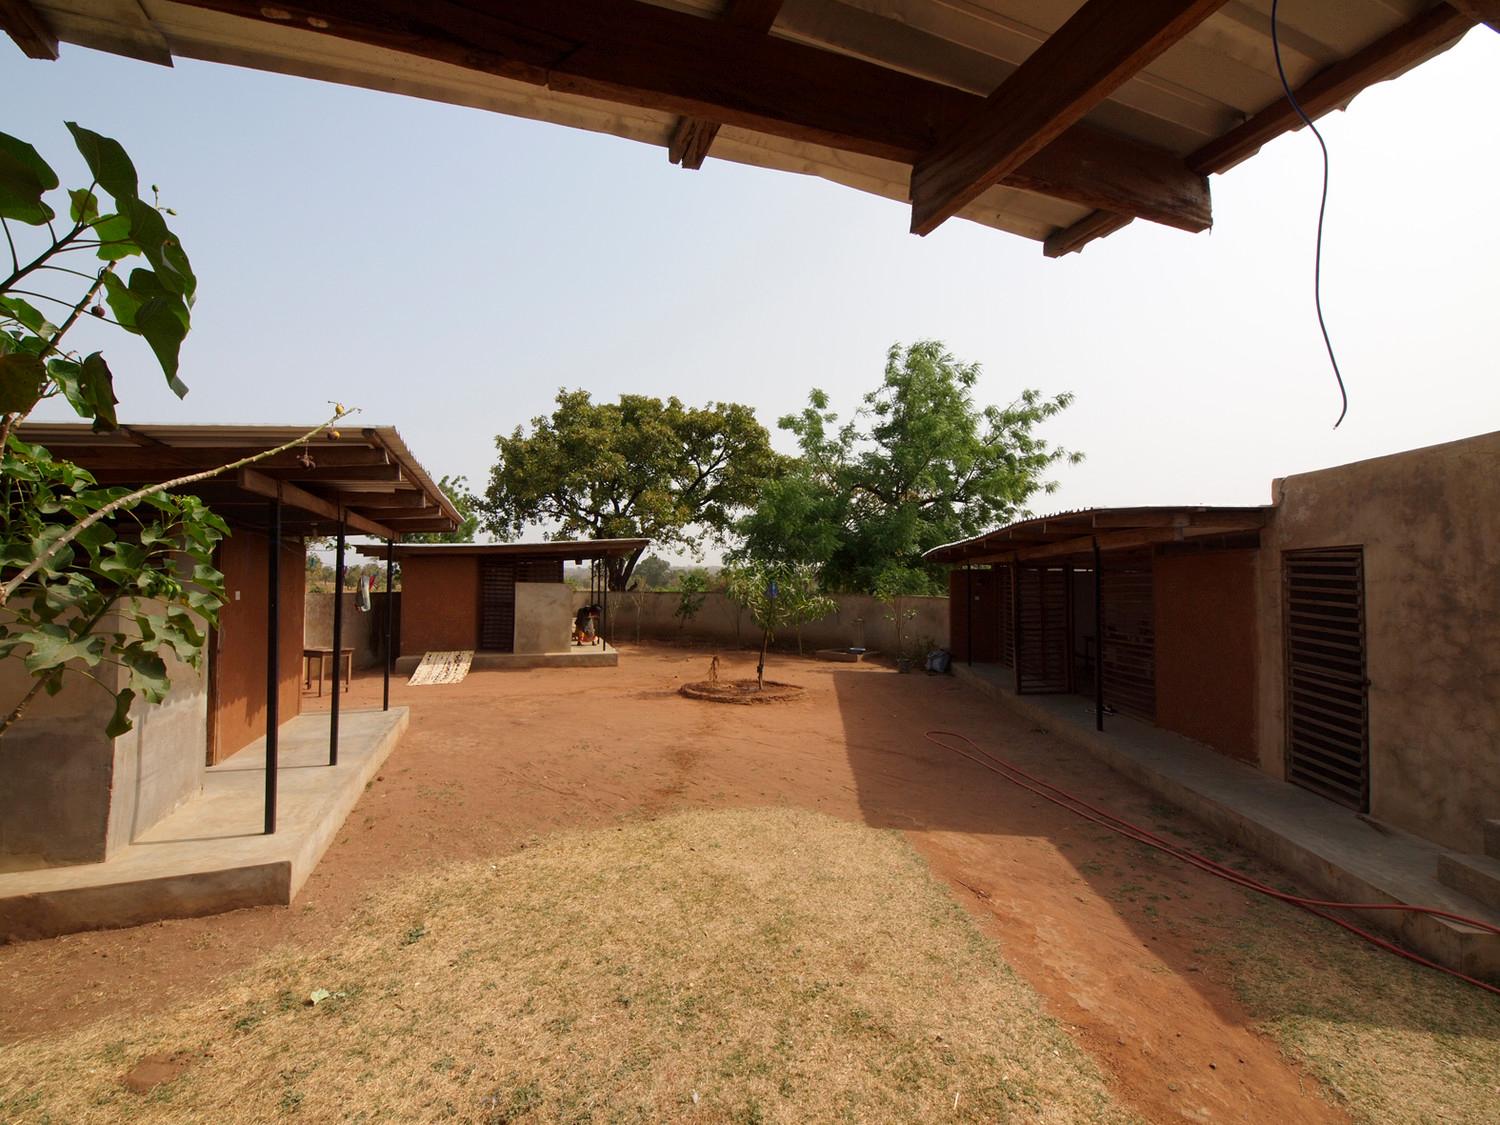 Volunteer compound communal structure and residences